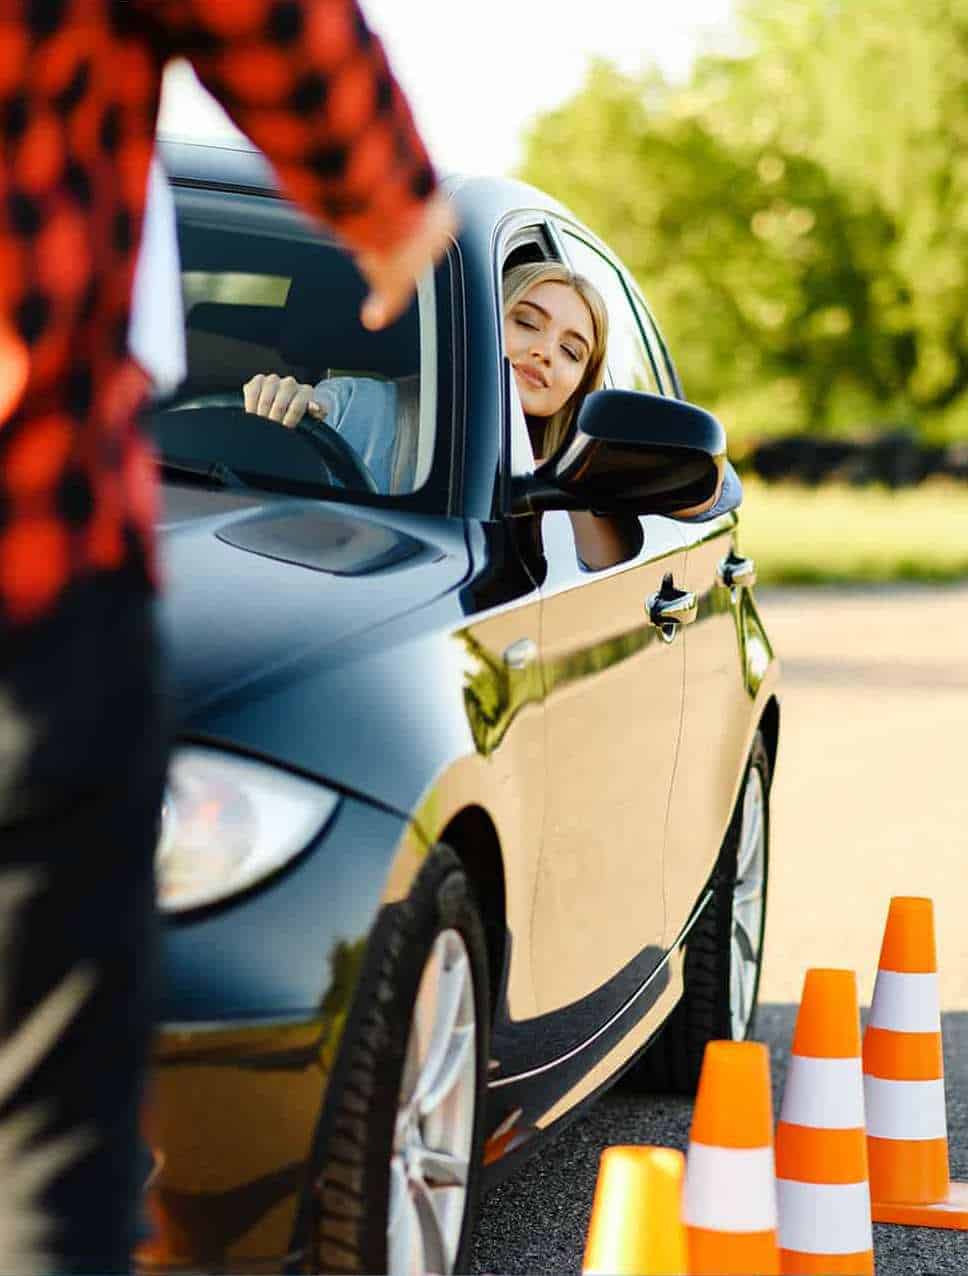 Top Best Driving Lessons in London